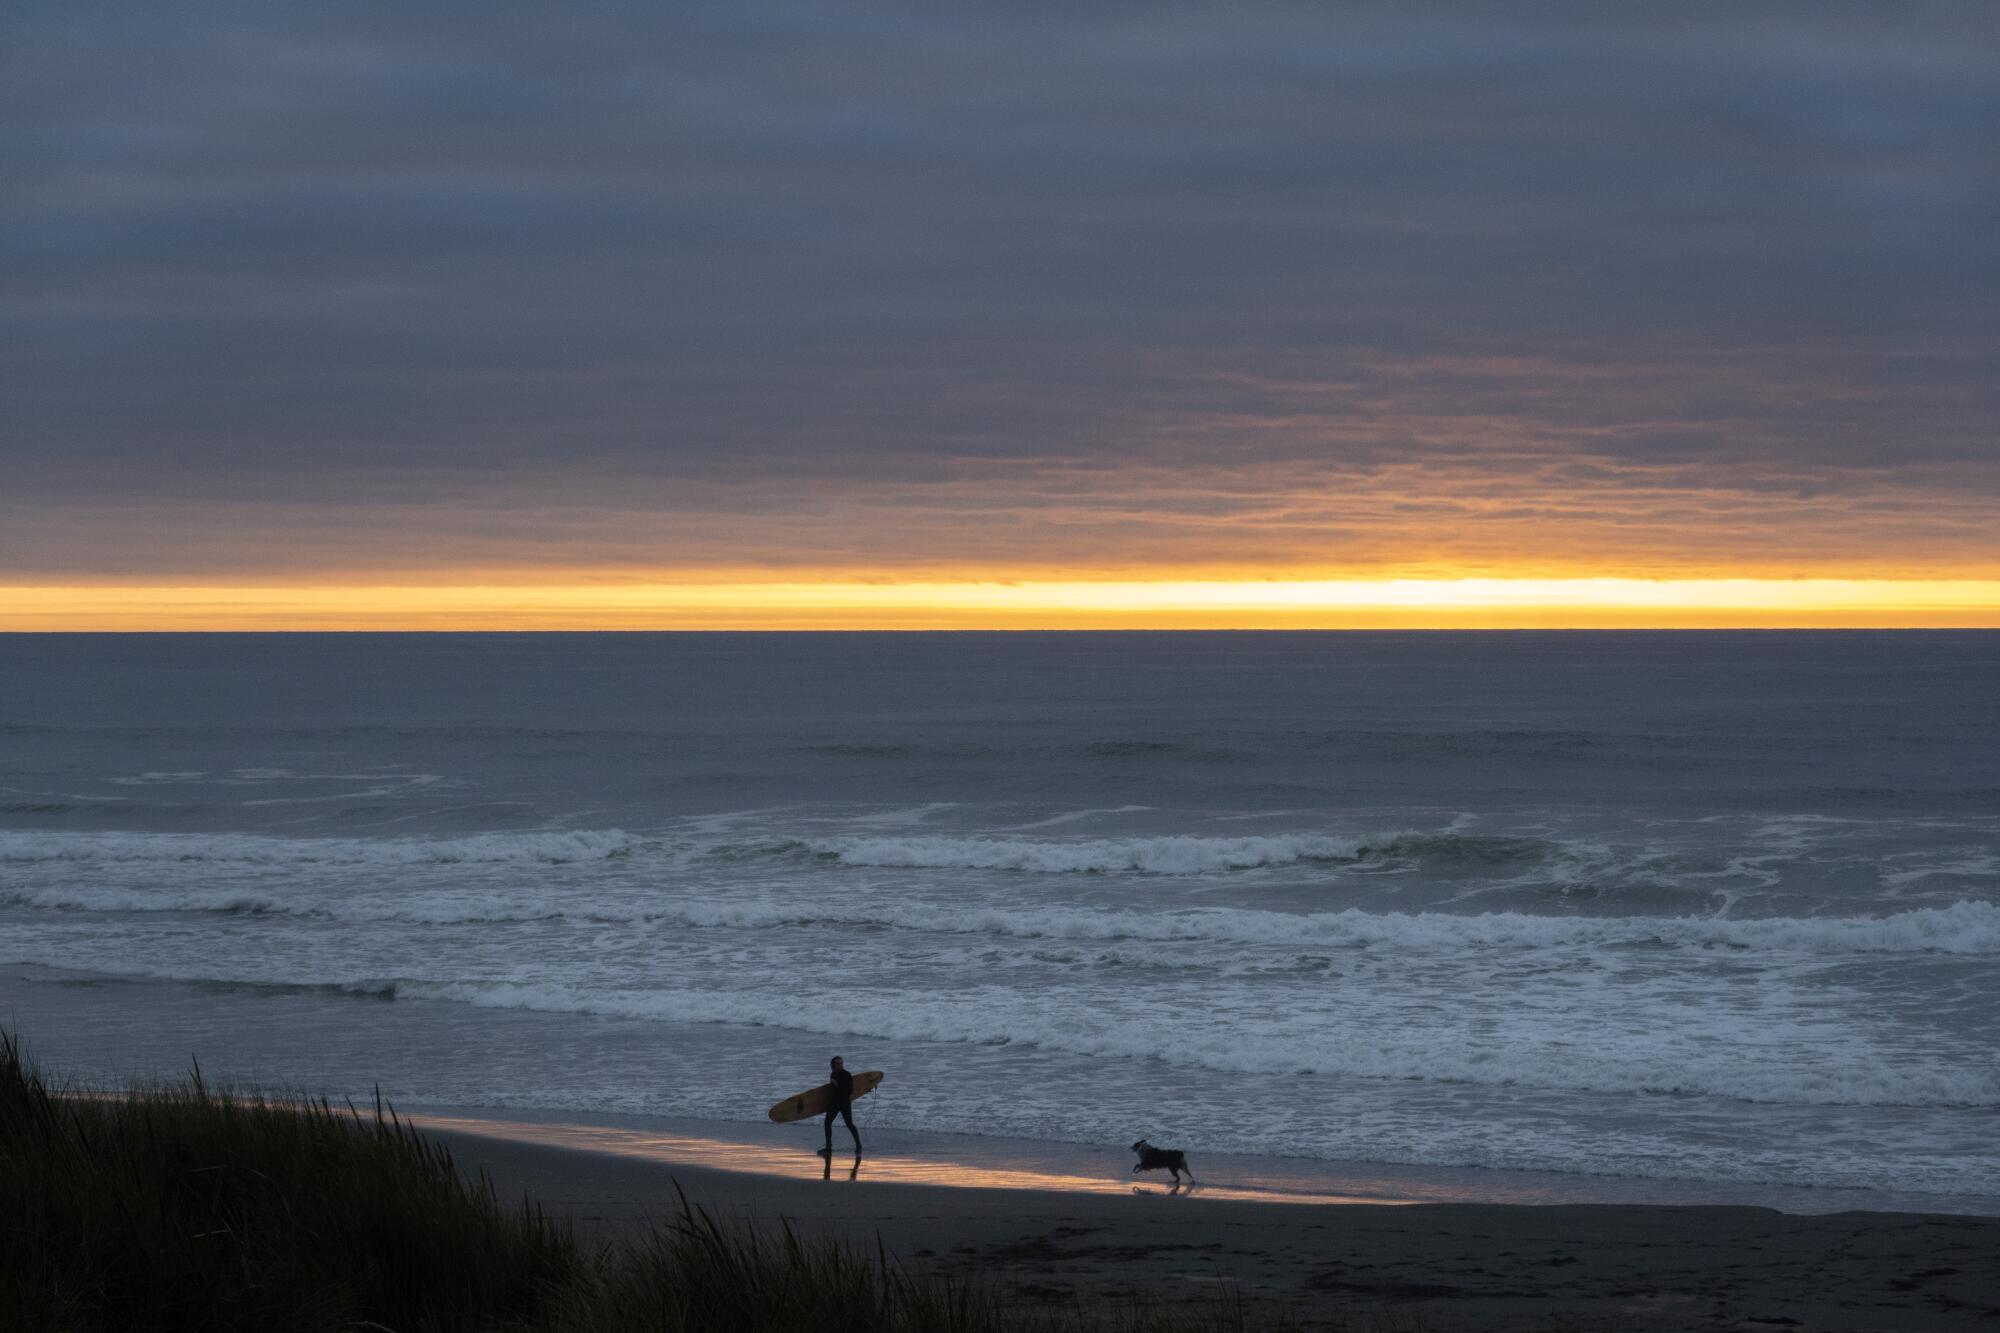 Surfer and dog walk by the beach during sunset.